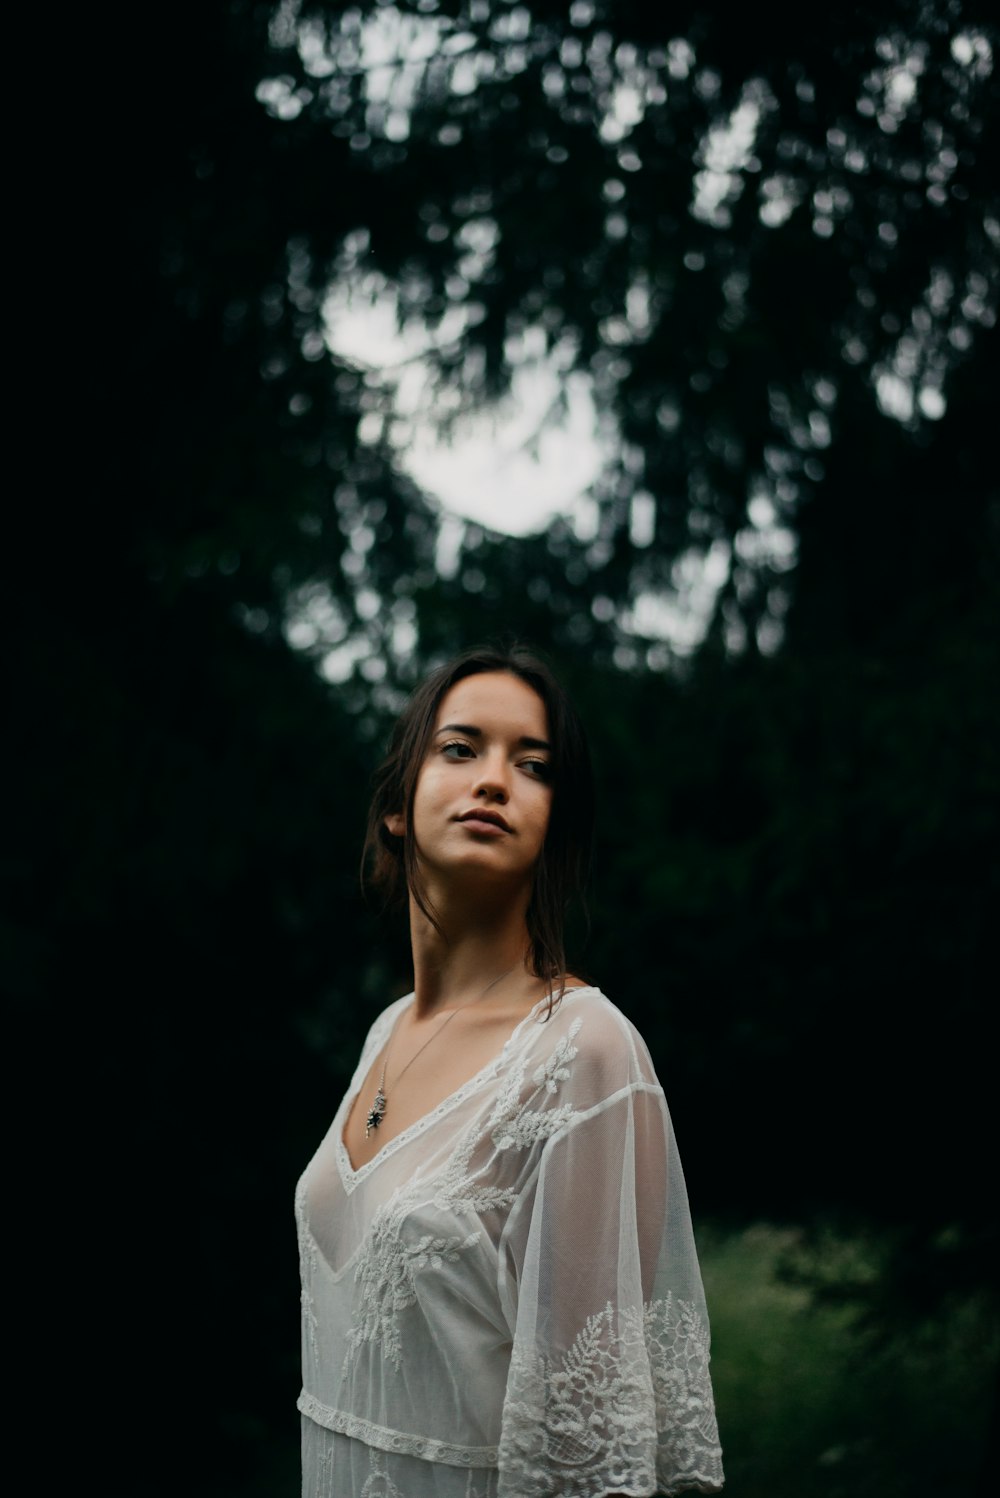 selective focus photography of woman standing near trees wearing white sheer top